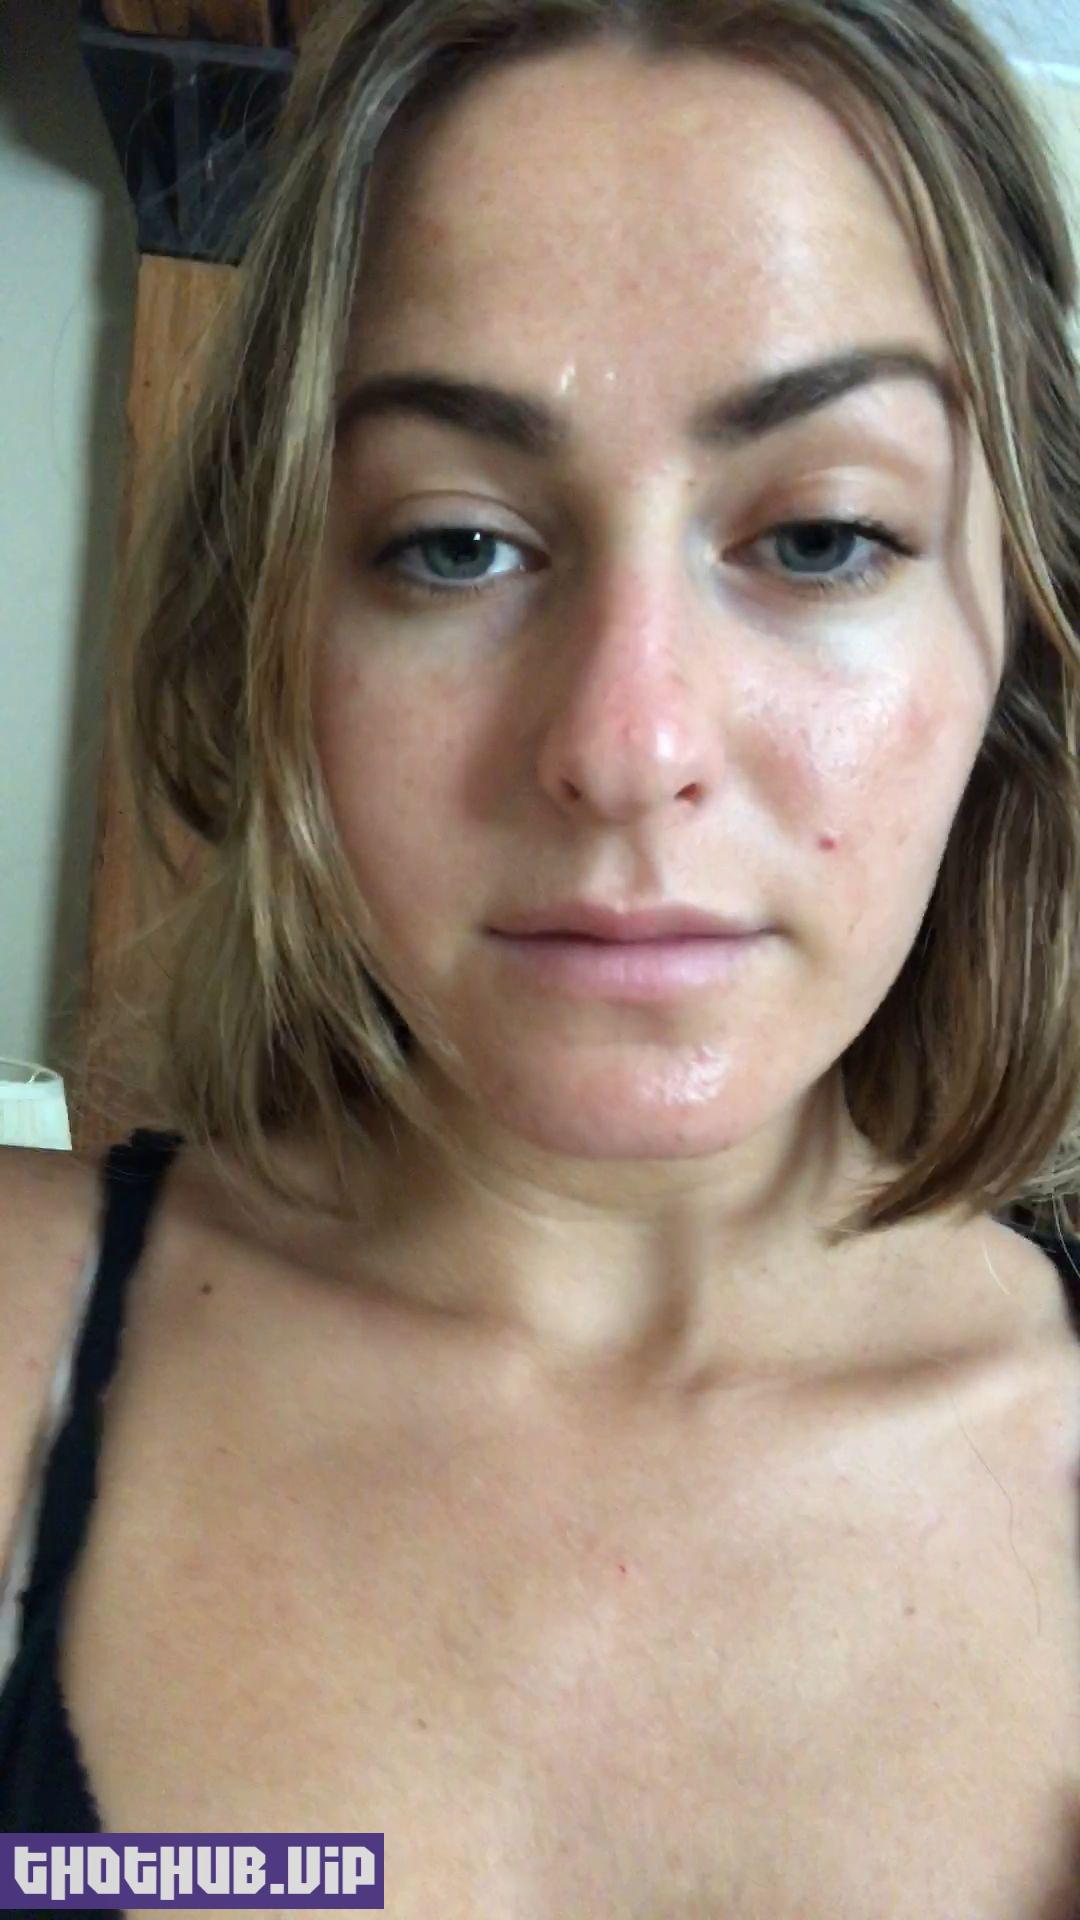 Scout Taylor-Compton nude pussy close-up selfies leaked from hacked iCloud